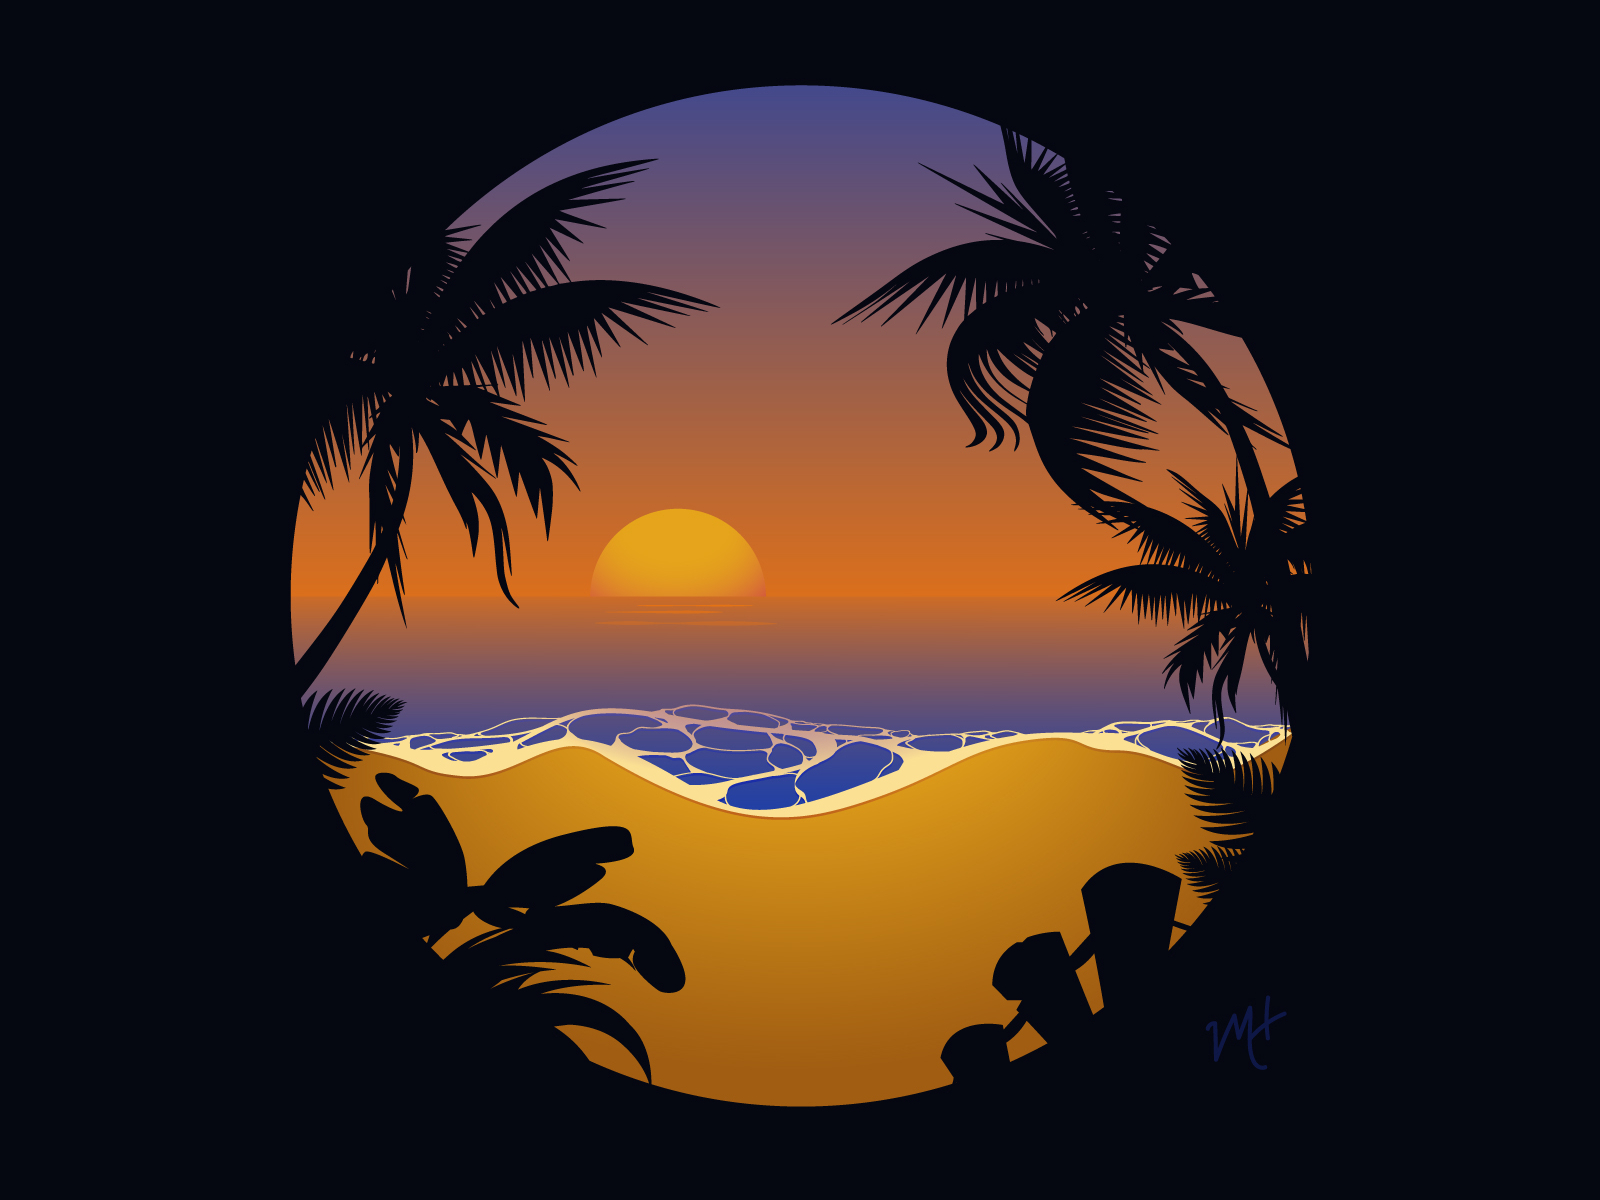 Sunset Beach Sillouette Illustration by The Abear Creative on Dribbble